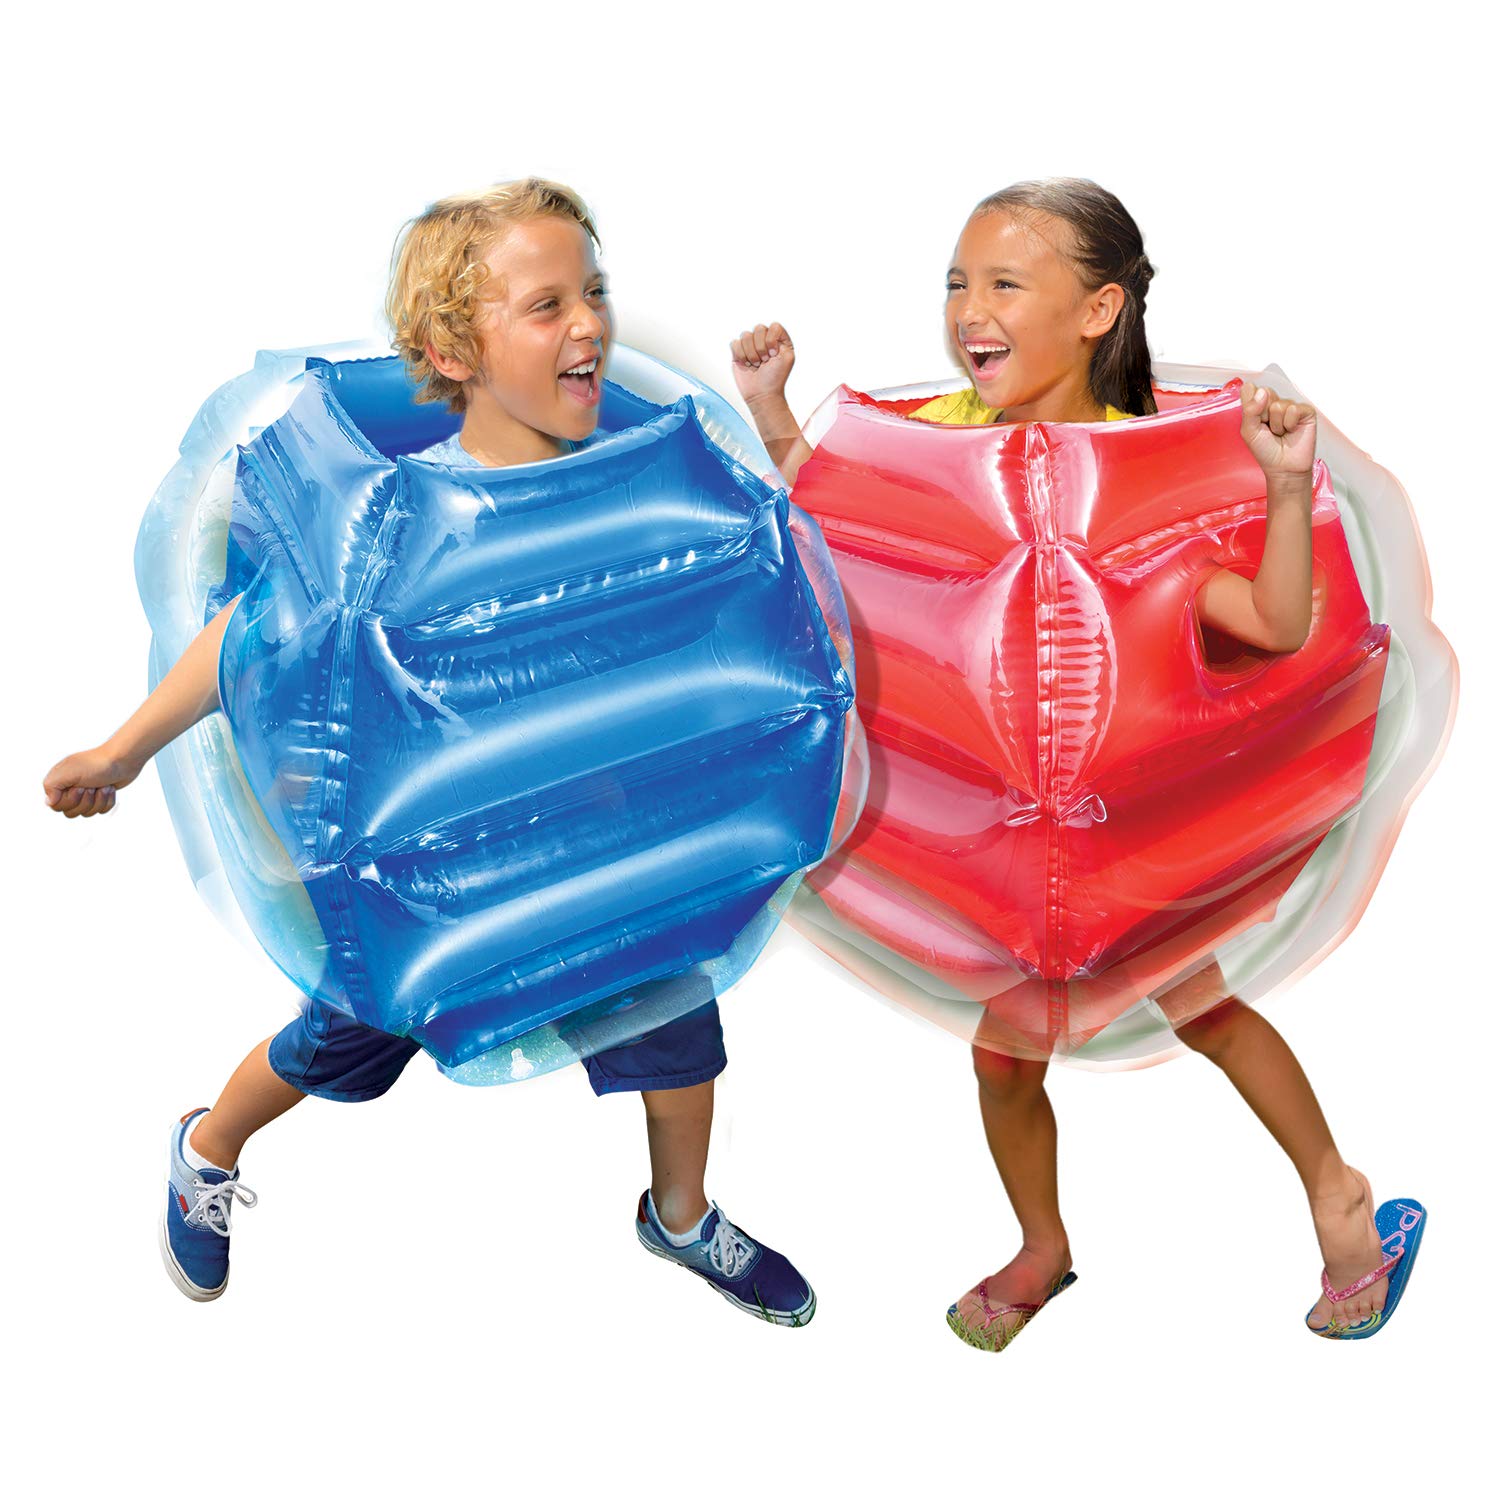 BANZAI Bump N Bounce Body Bumpers (Includes Two / 2) Body Belly Bumper Suit Spring Summer Inflatable Air Backyard Toy